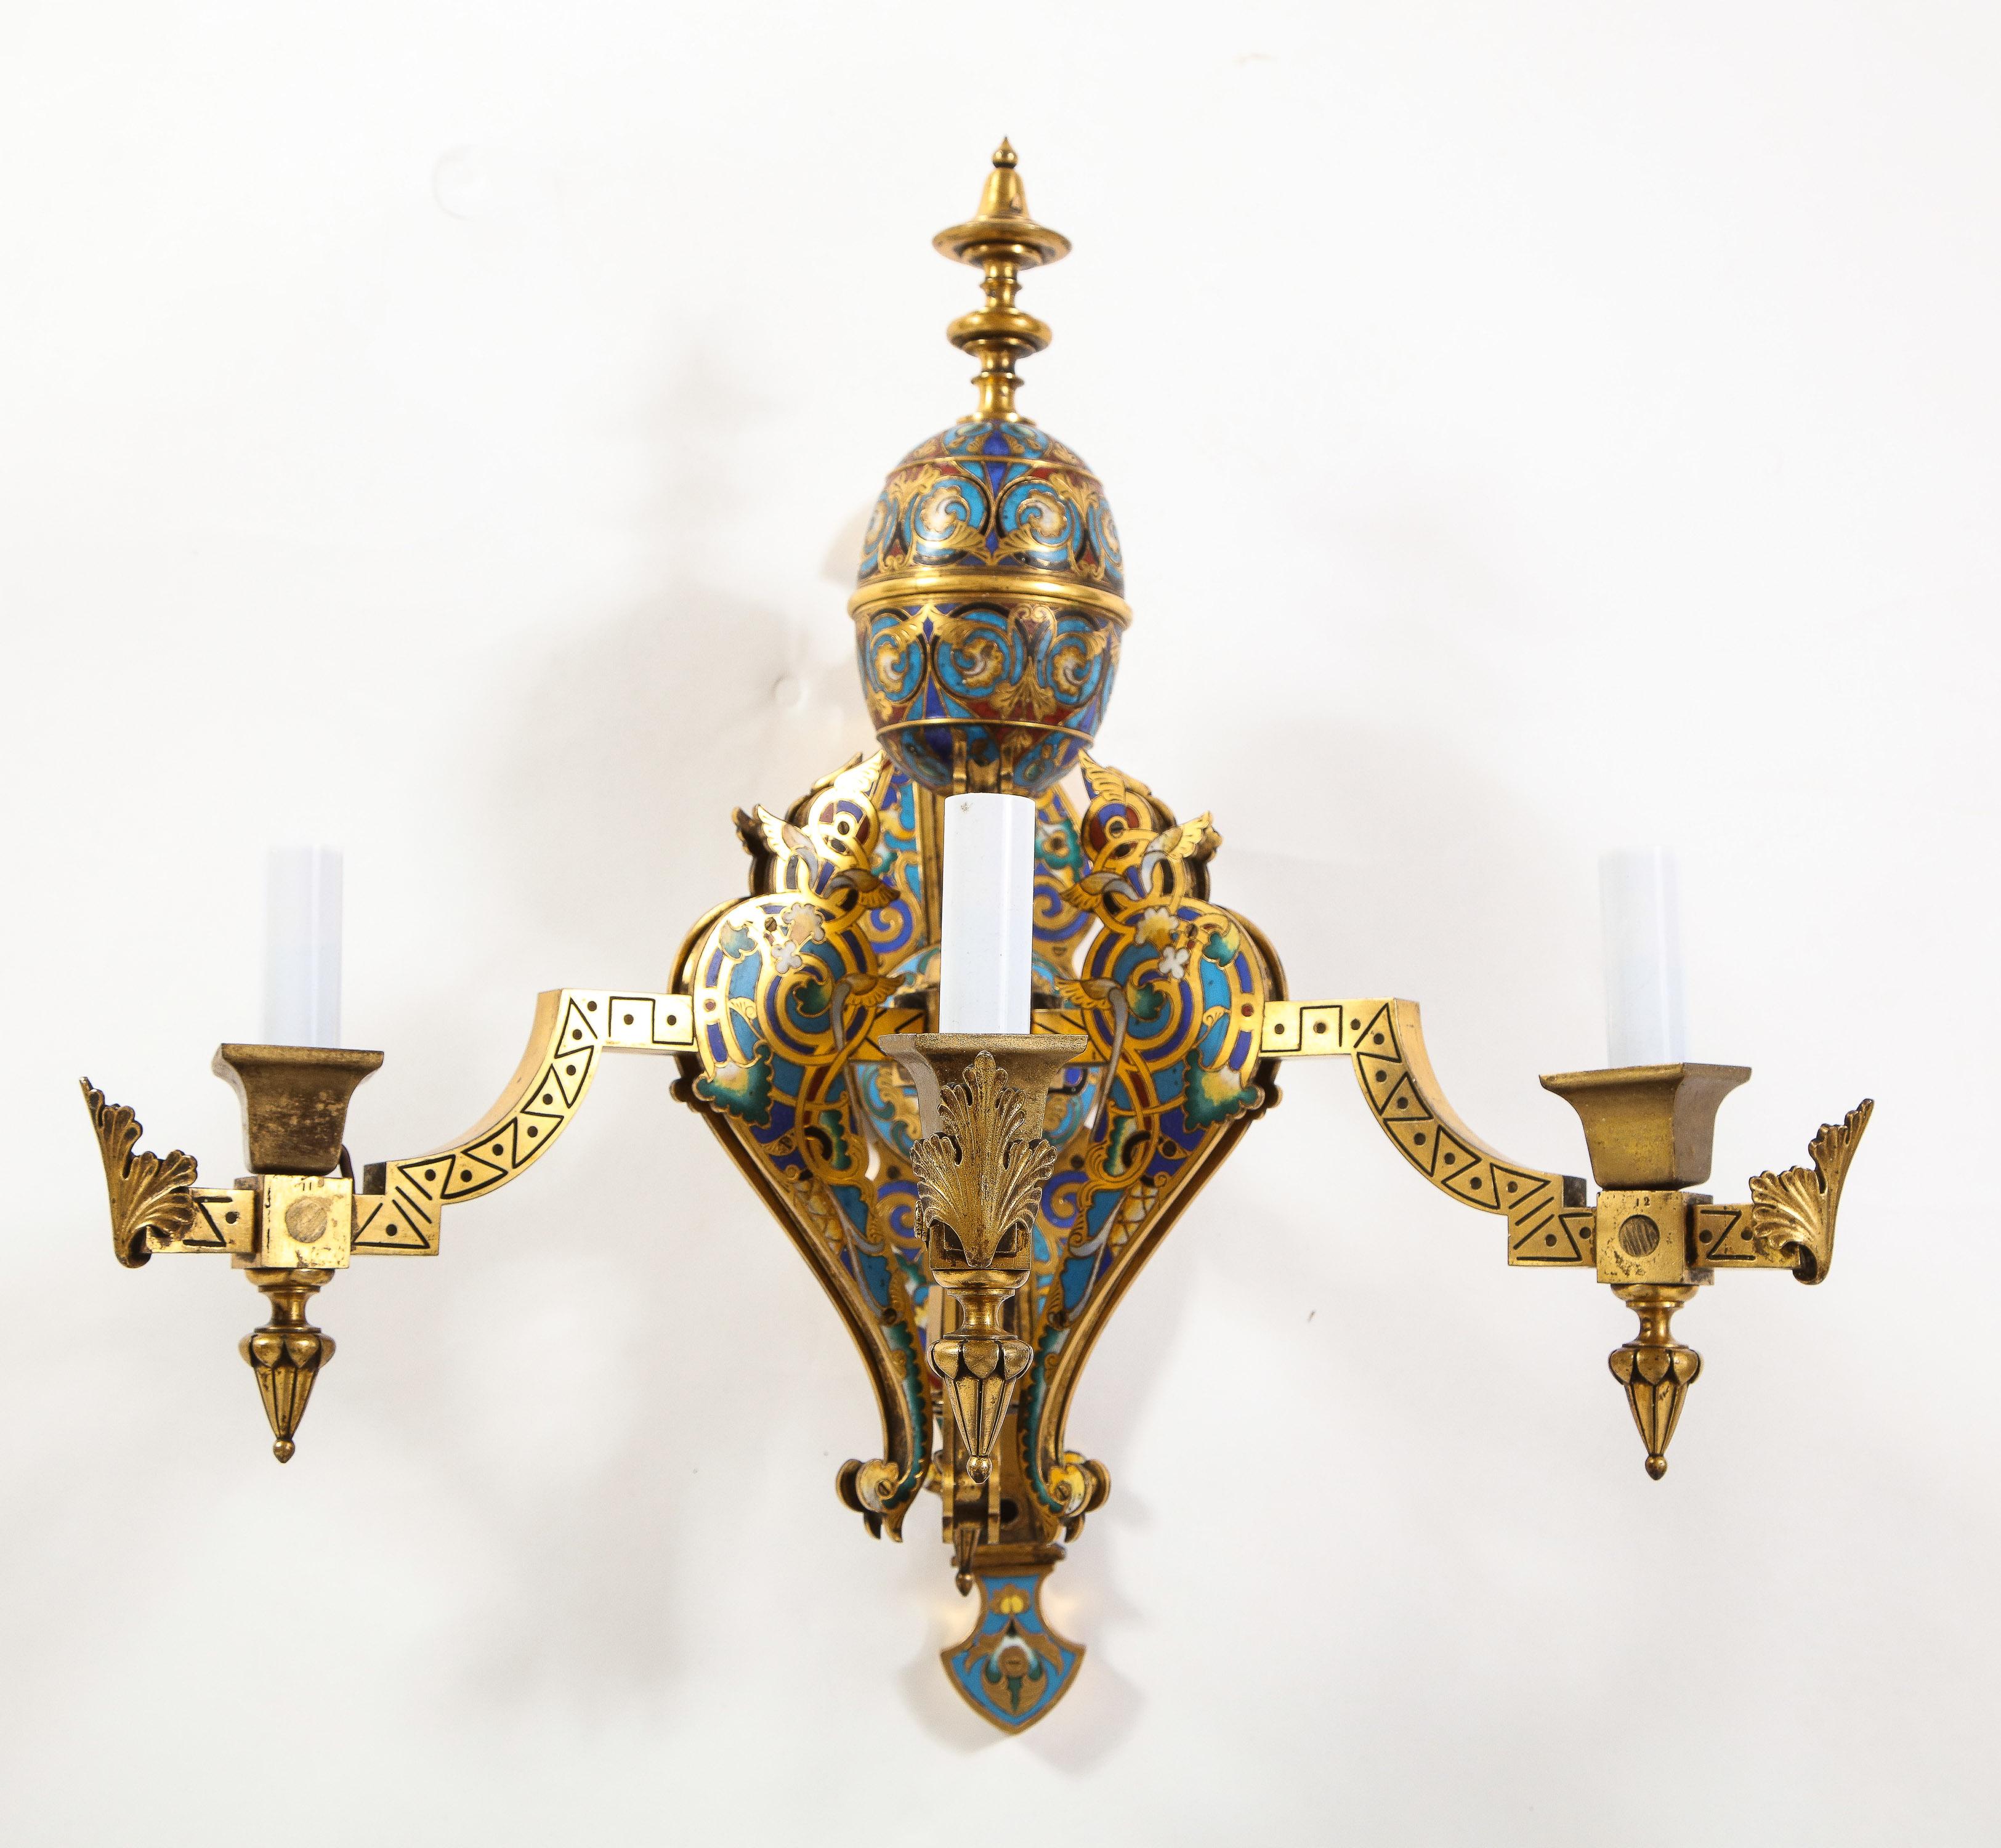 A Marvelous Pair of Gilt Bronze and Multi-Colored Champleve Enamel Three-Arm Wall Appliques/Sconces, Attributed to Barbedienne. This fantastic pair of sconces are each cast, hand-chased, and hand-chiseled with fantastic quality and craftsmanship.